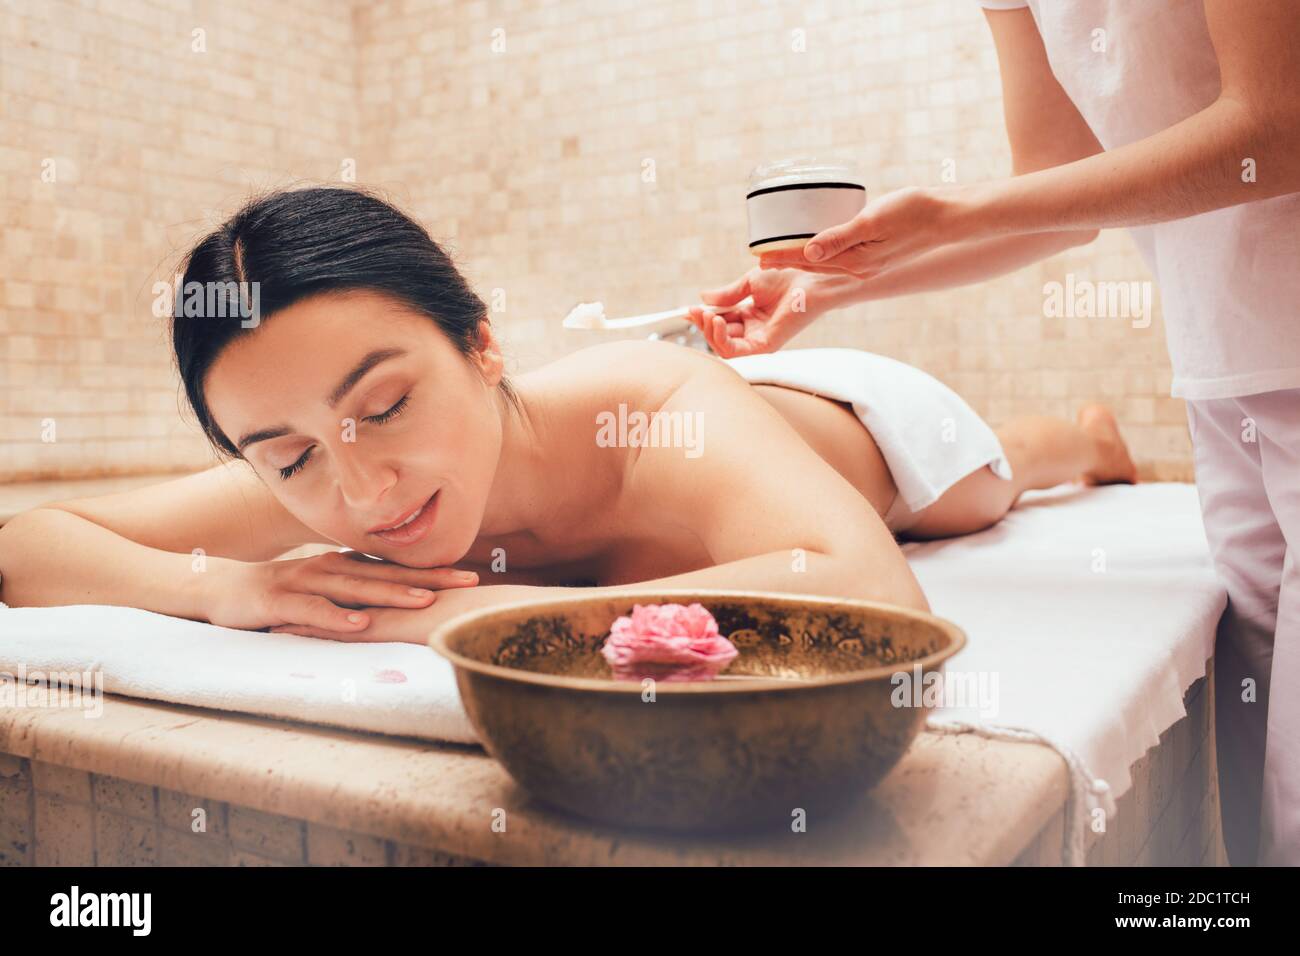 Exfoliate older skin with a body scrub. Time for pampering body and skin at spa. Brunette getting peel procedure after body massage. Stock Photo